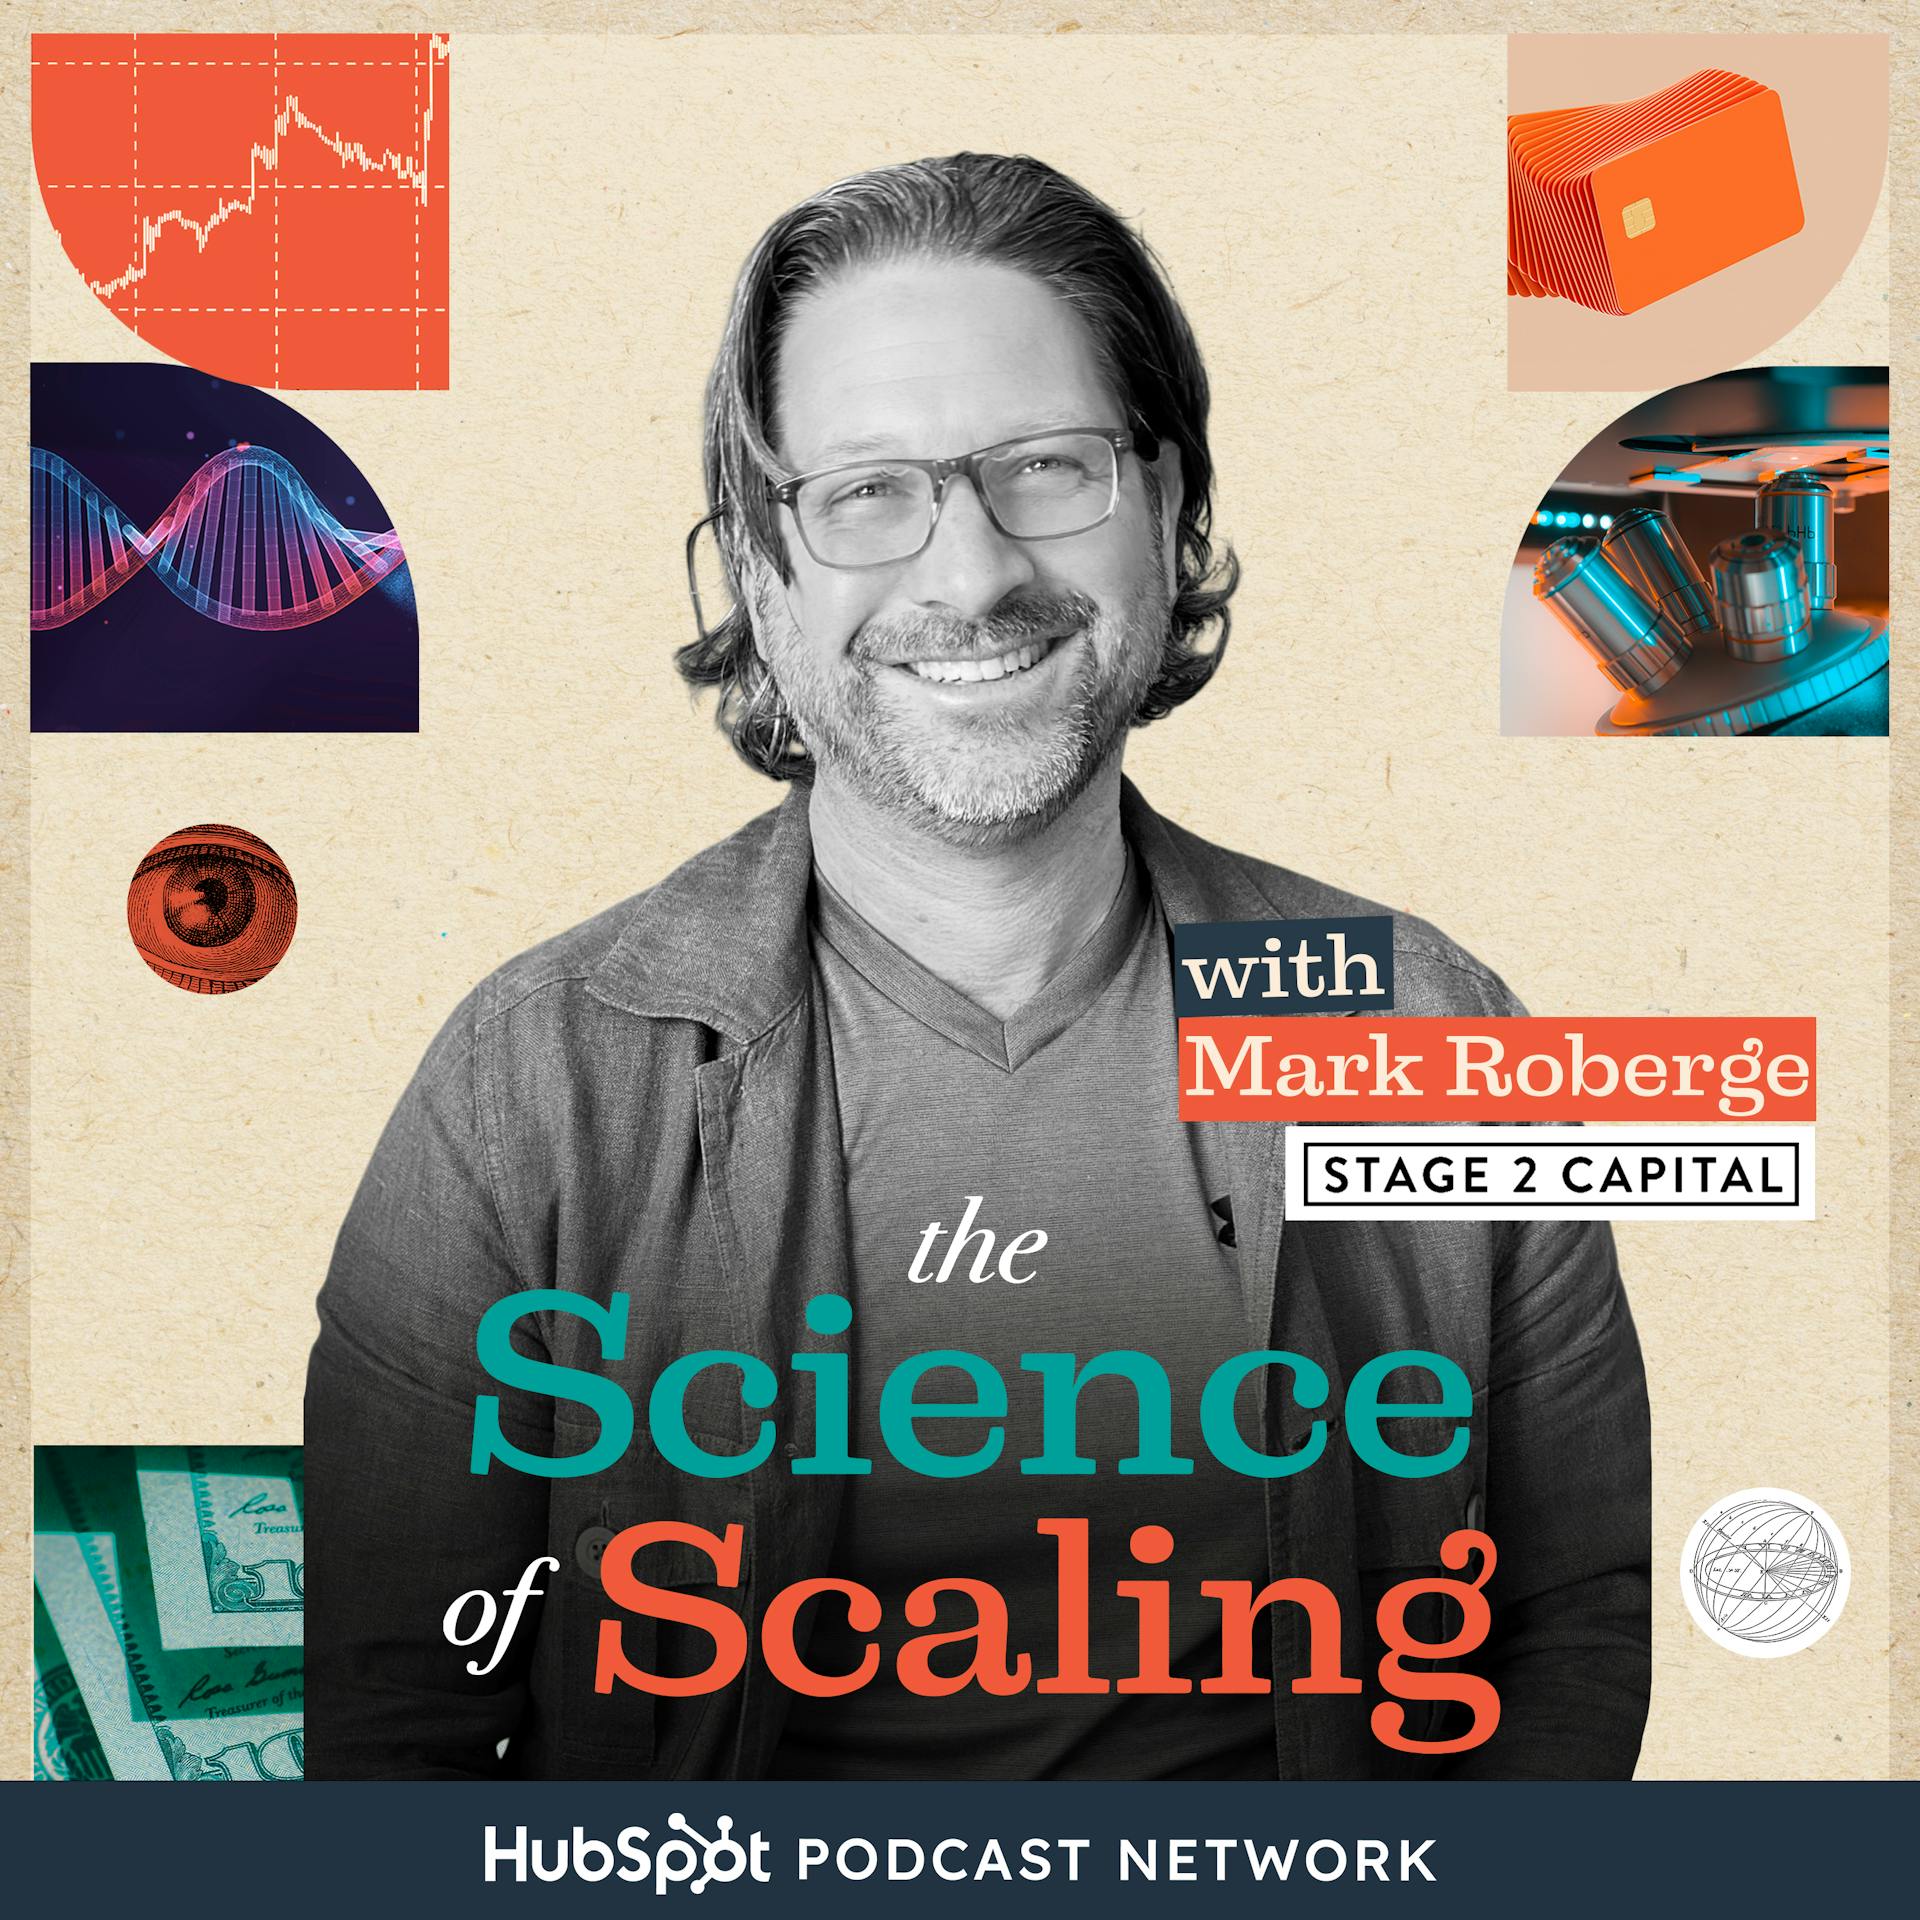 Review: The Science of Scaling from Hubspot